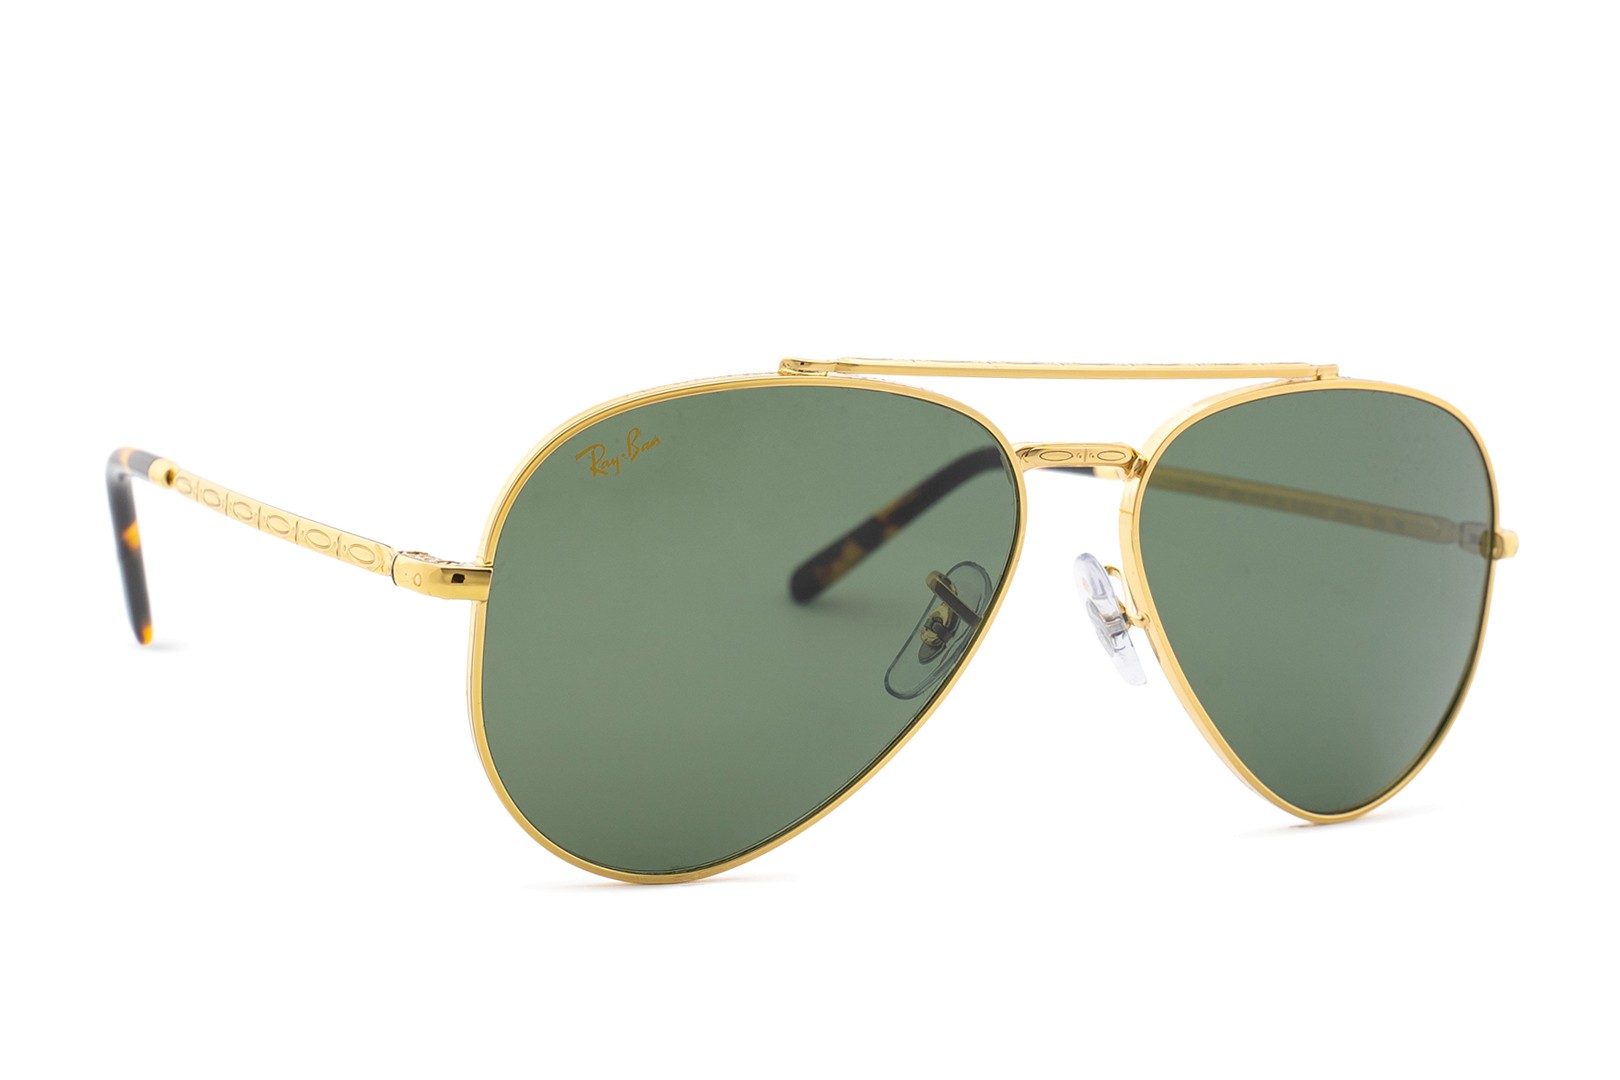 With other bands reins Price cut Ray-Ban® New Aviator RB3625 919631 | Lentiamo